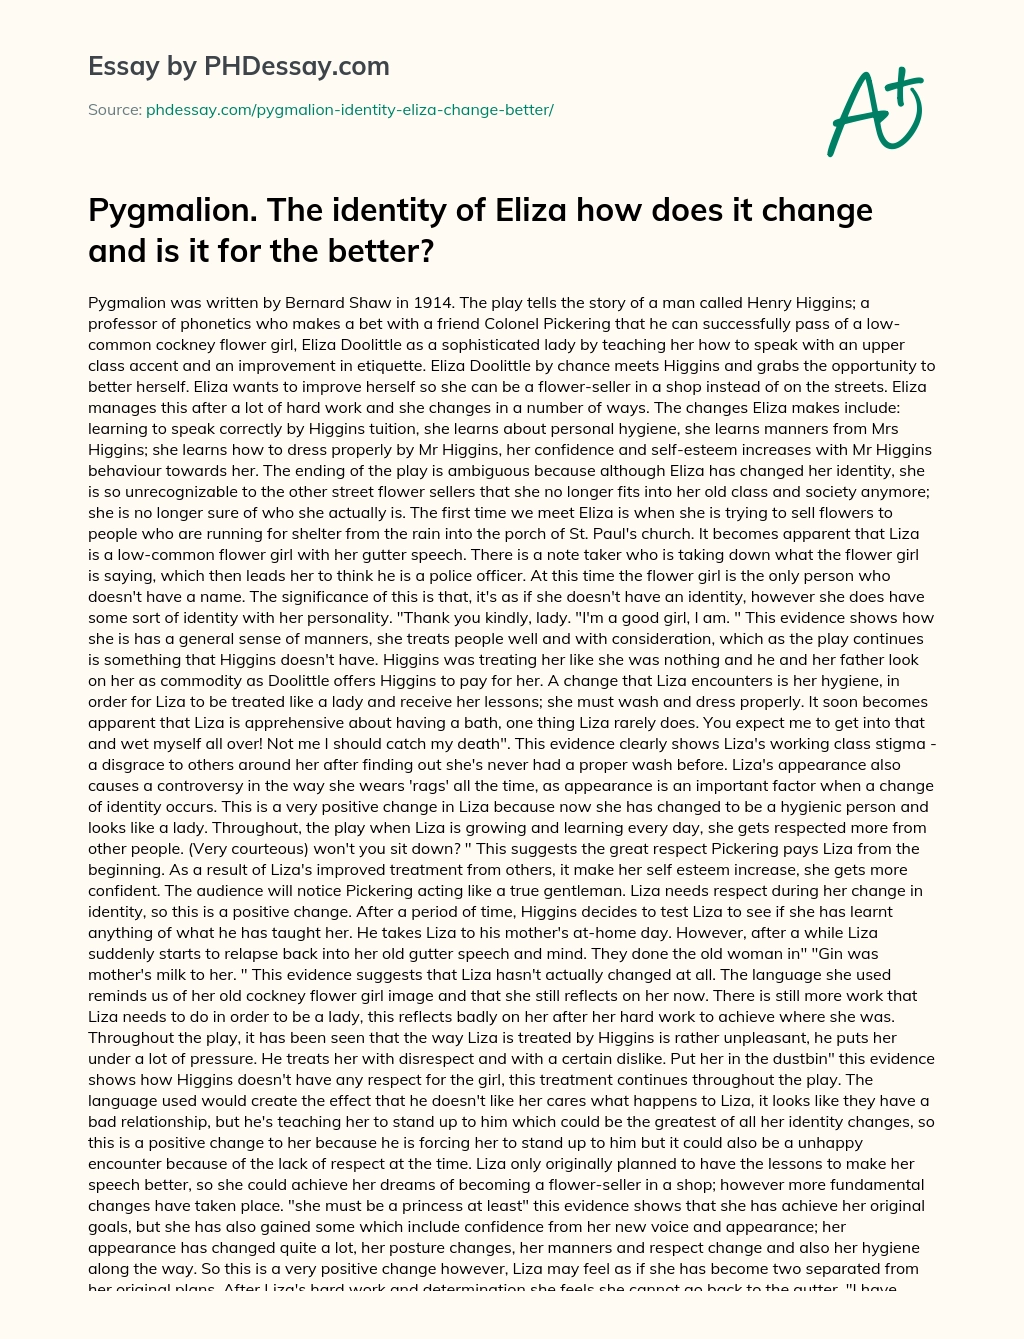 Pygmalion. The identity of Eliza how does it change and is it for the better? essay